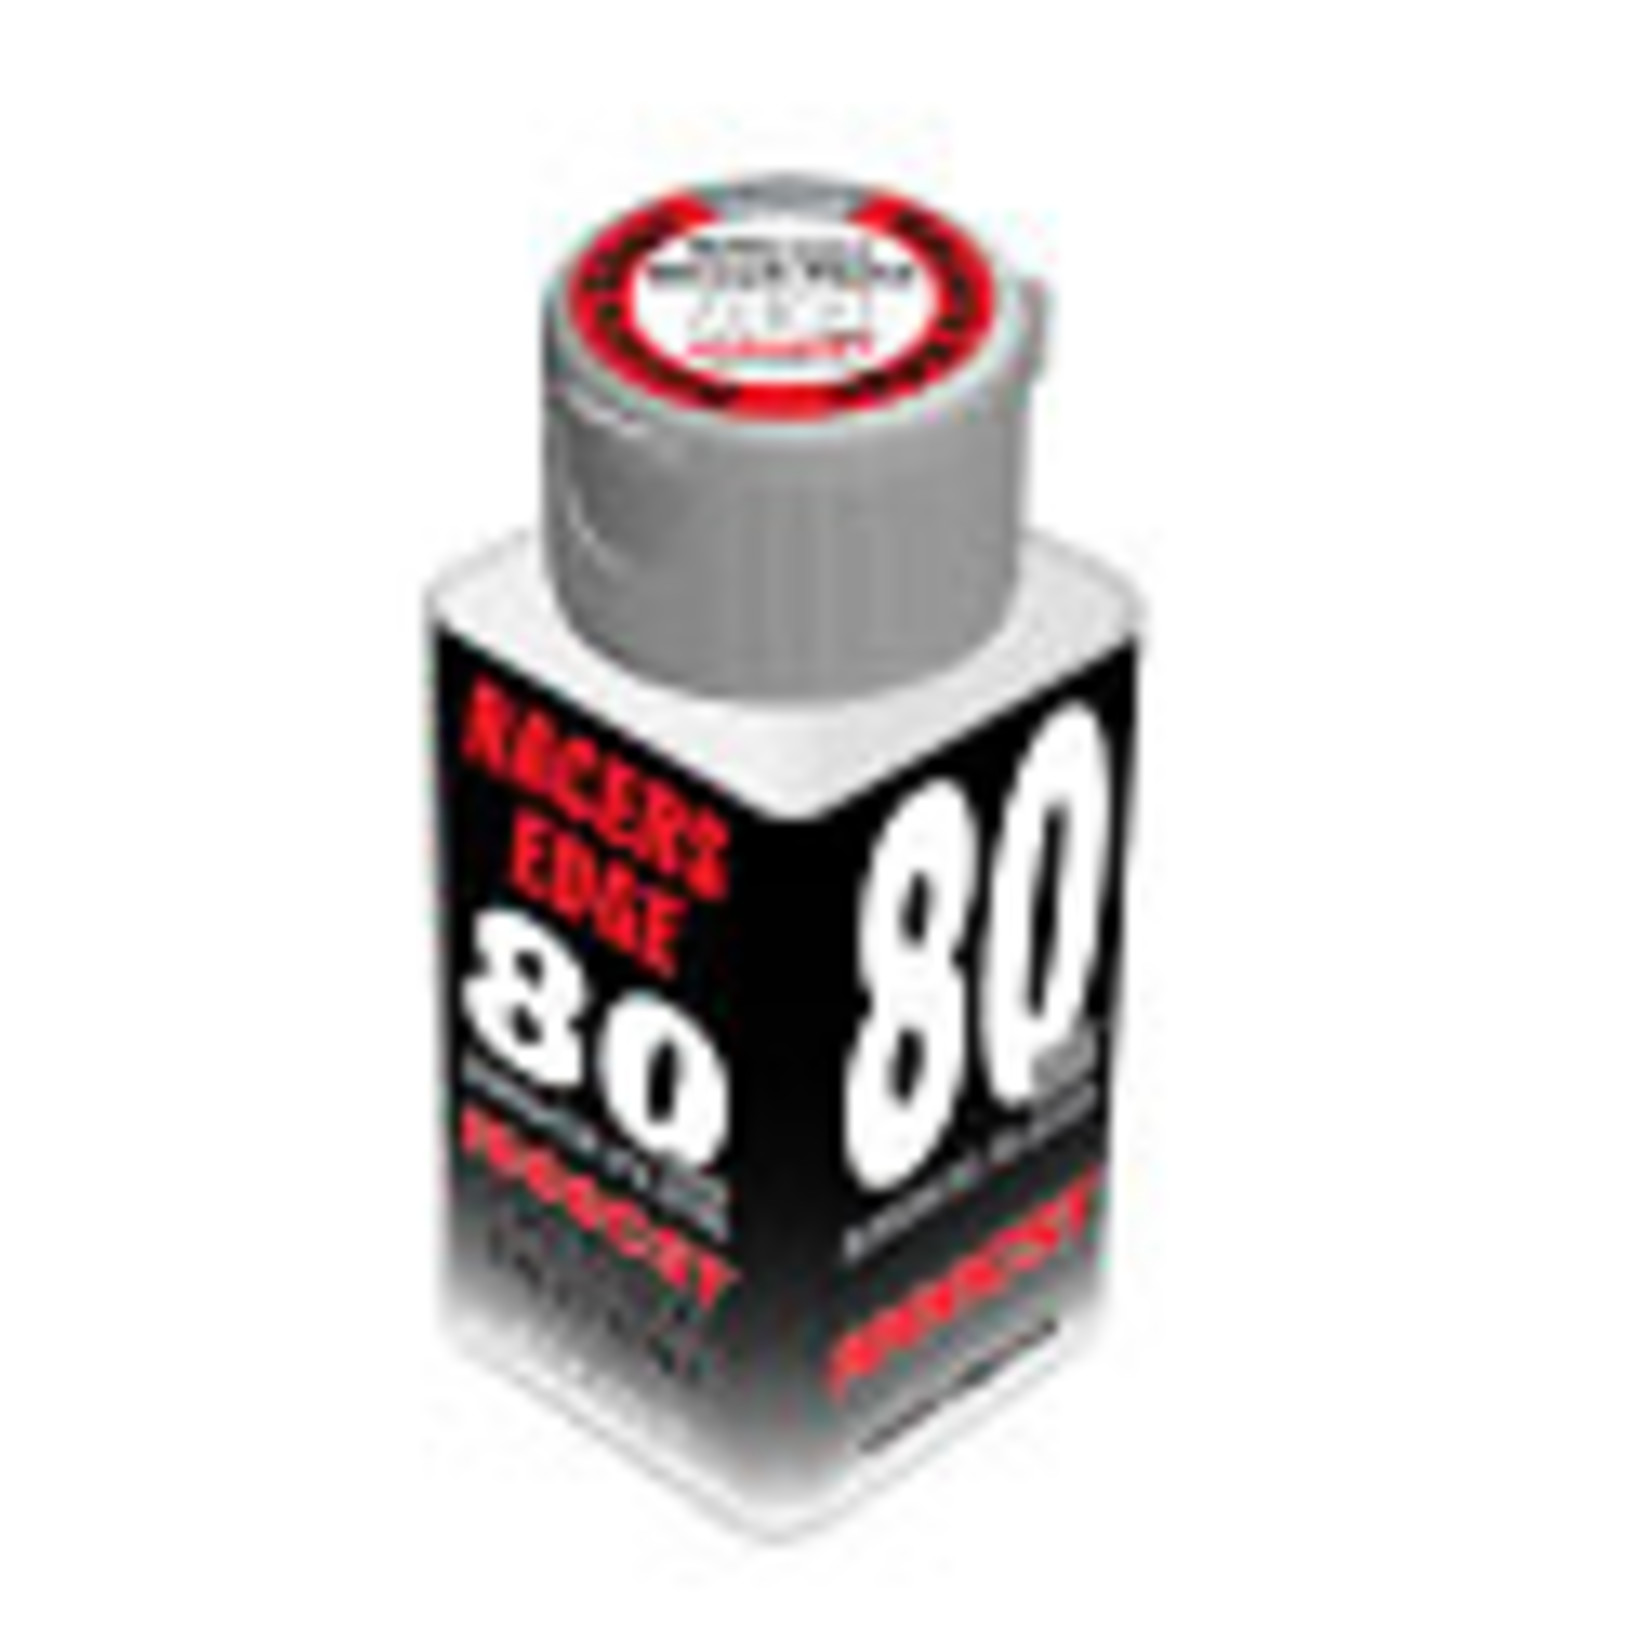 Racers Edge 80 Weight, 1,000cSt, 70ml 2.36oz Pure Silicone Shock Oil